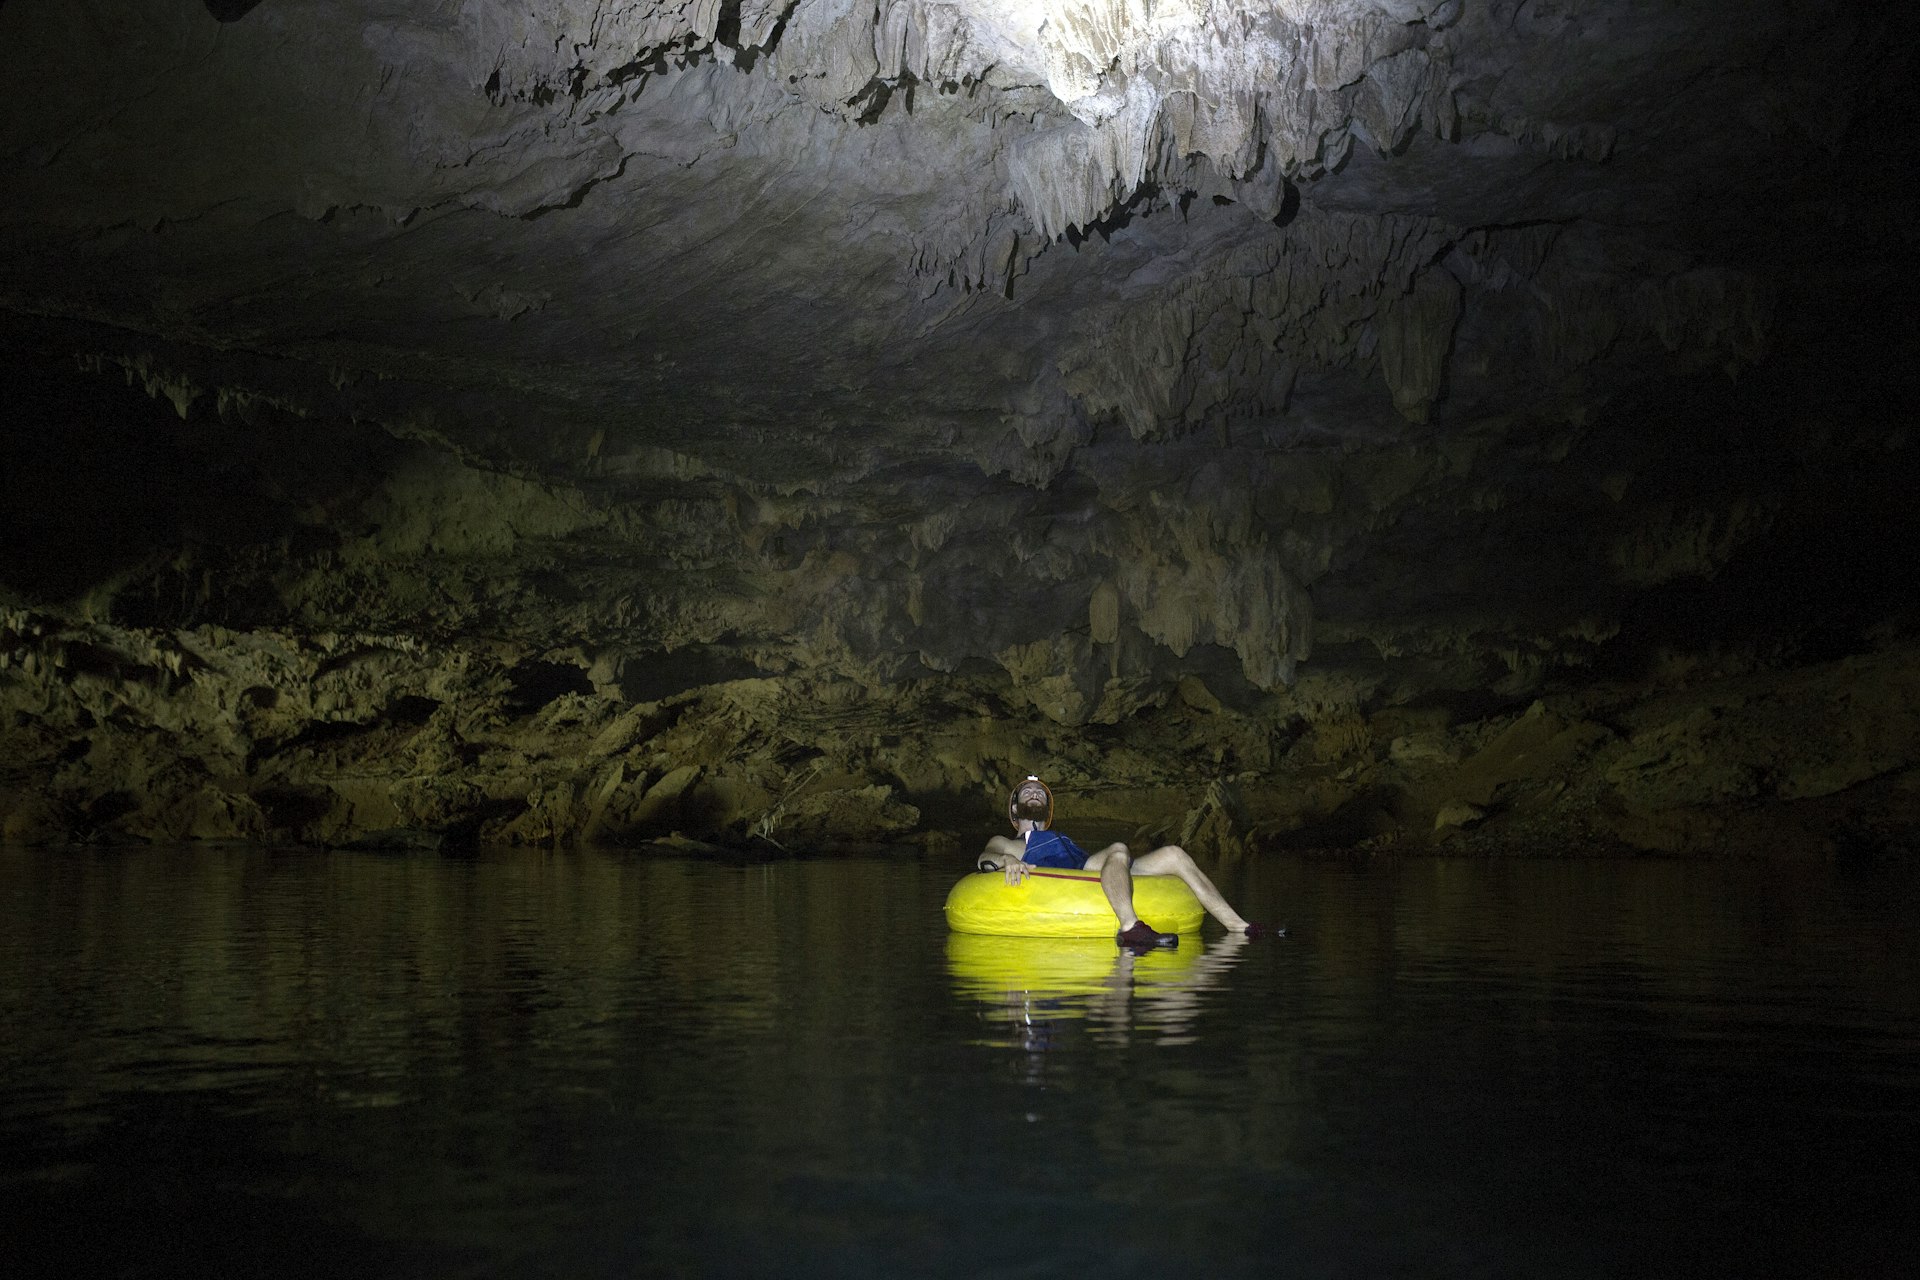 Man river tubing inside a cave in Belize.